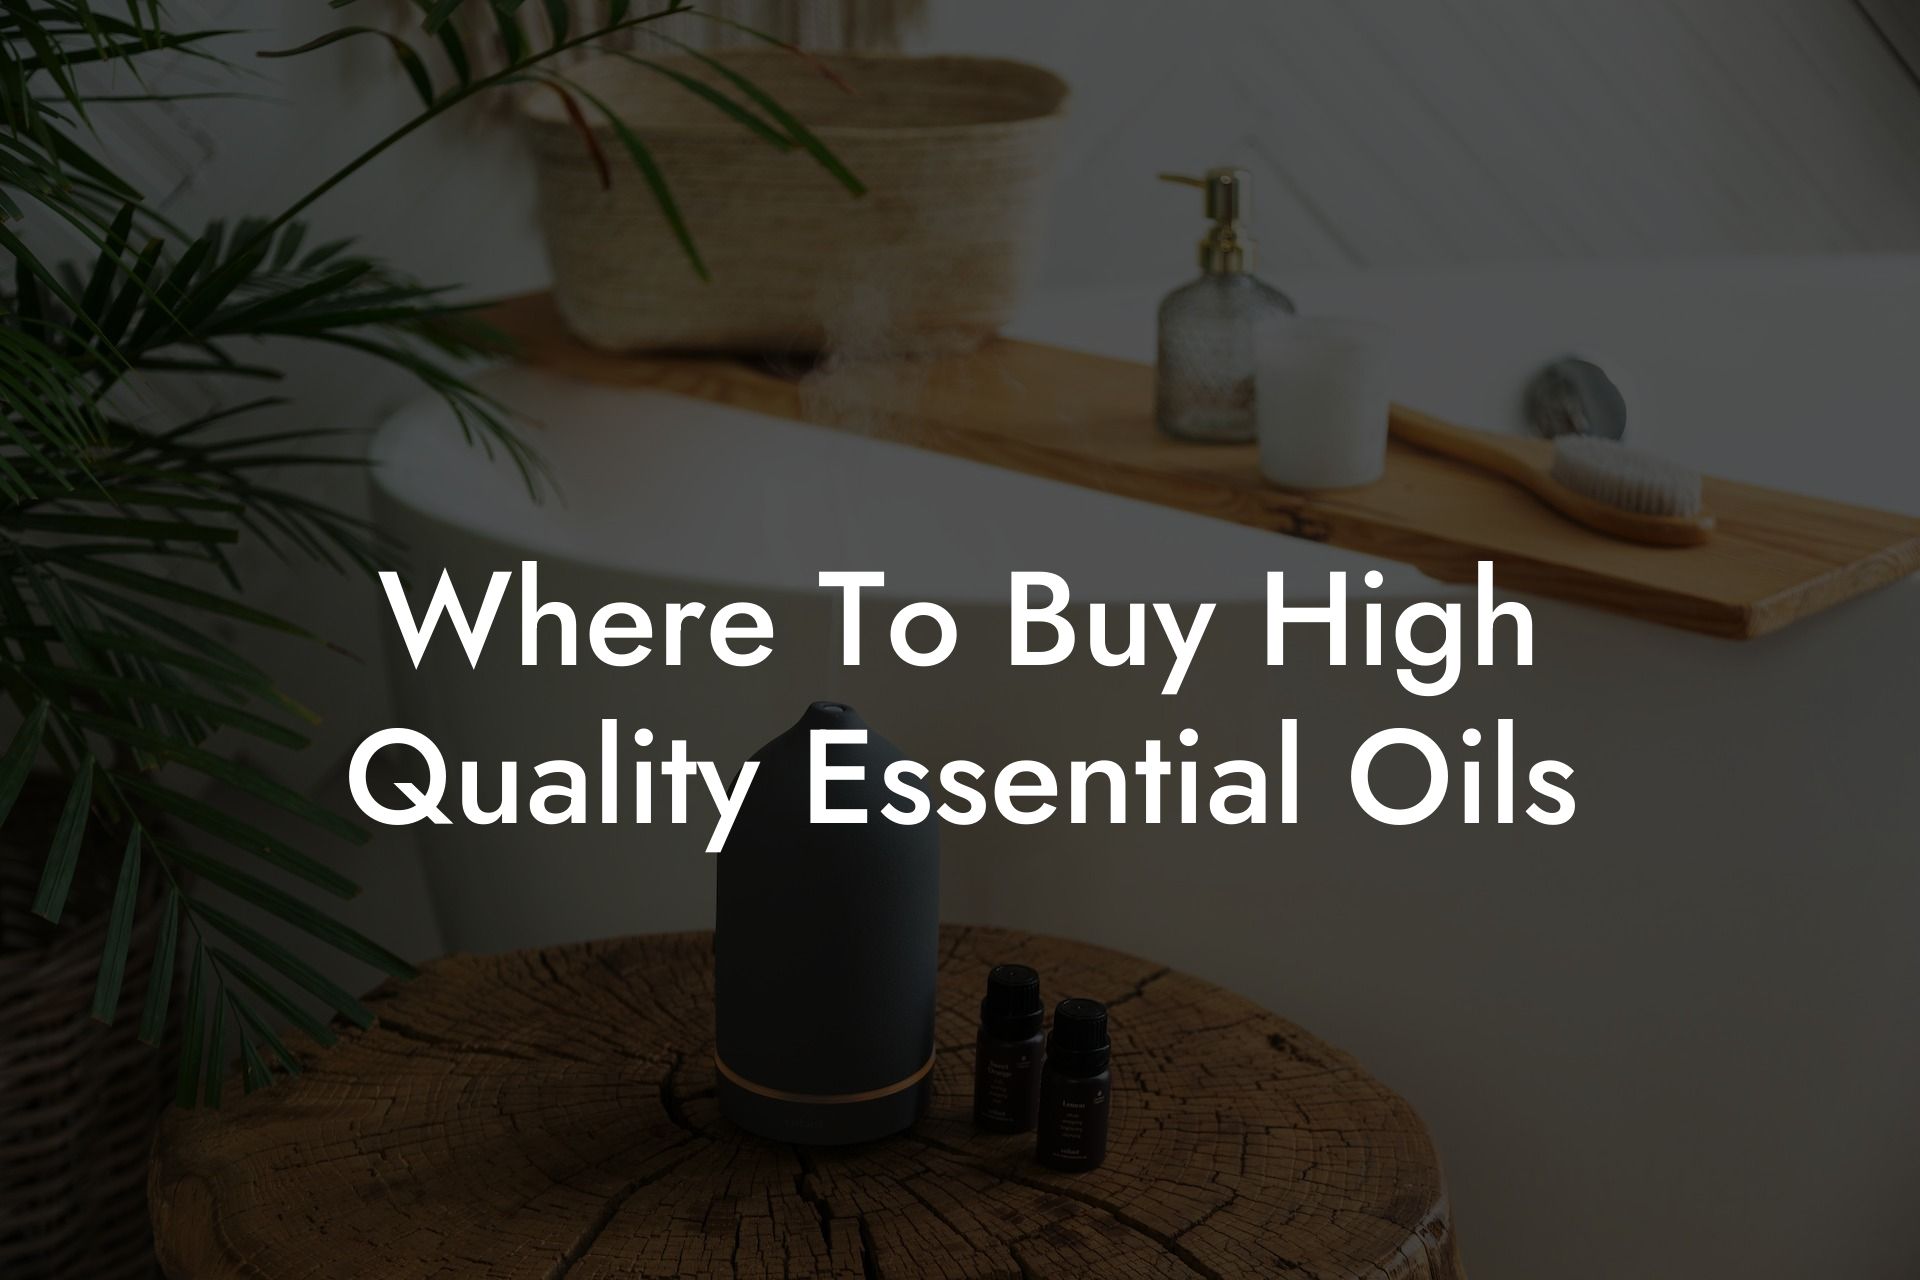 Where To Buy High Quality Essential Oils